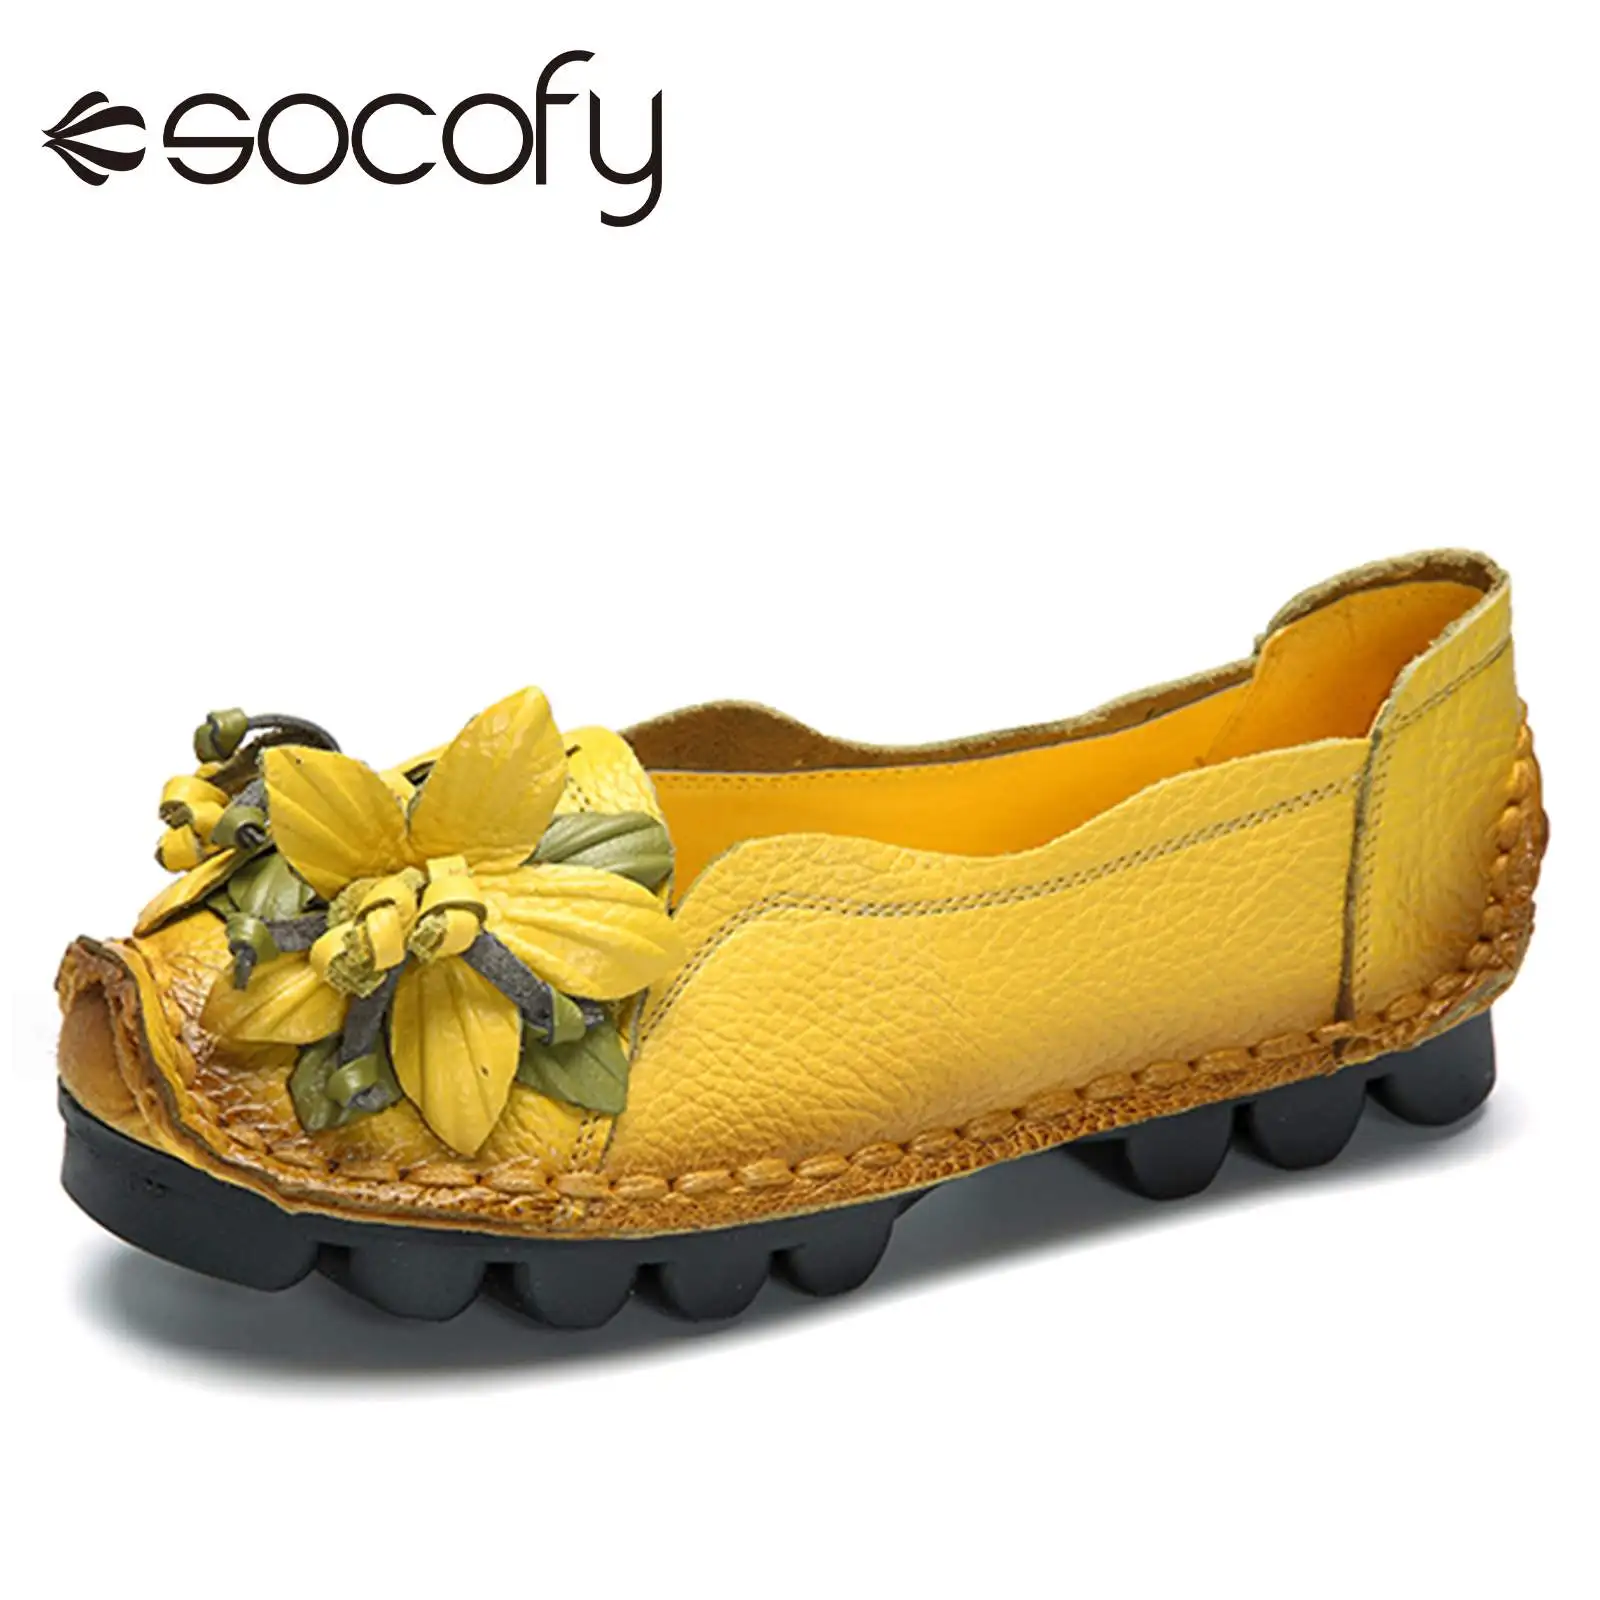 

SOCOFY 2022 Genuine Leather Handmade Women's Flat Shoes Flower Loafers Soft Flat Casual Shoes Adjustable Wedge reathable Shoes